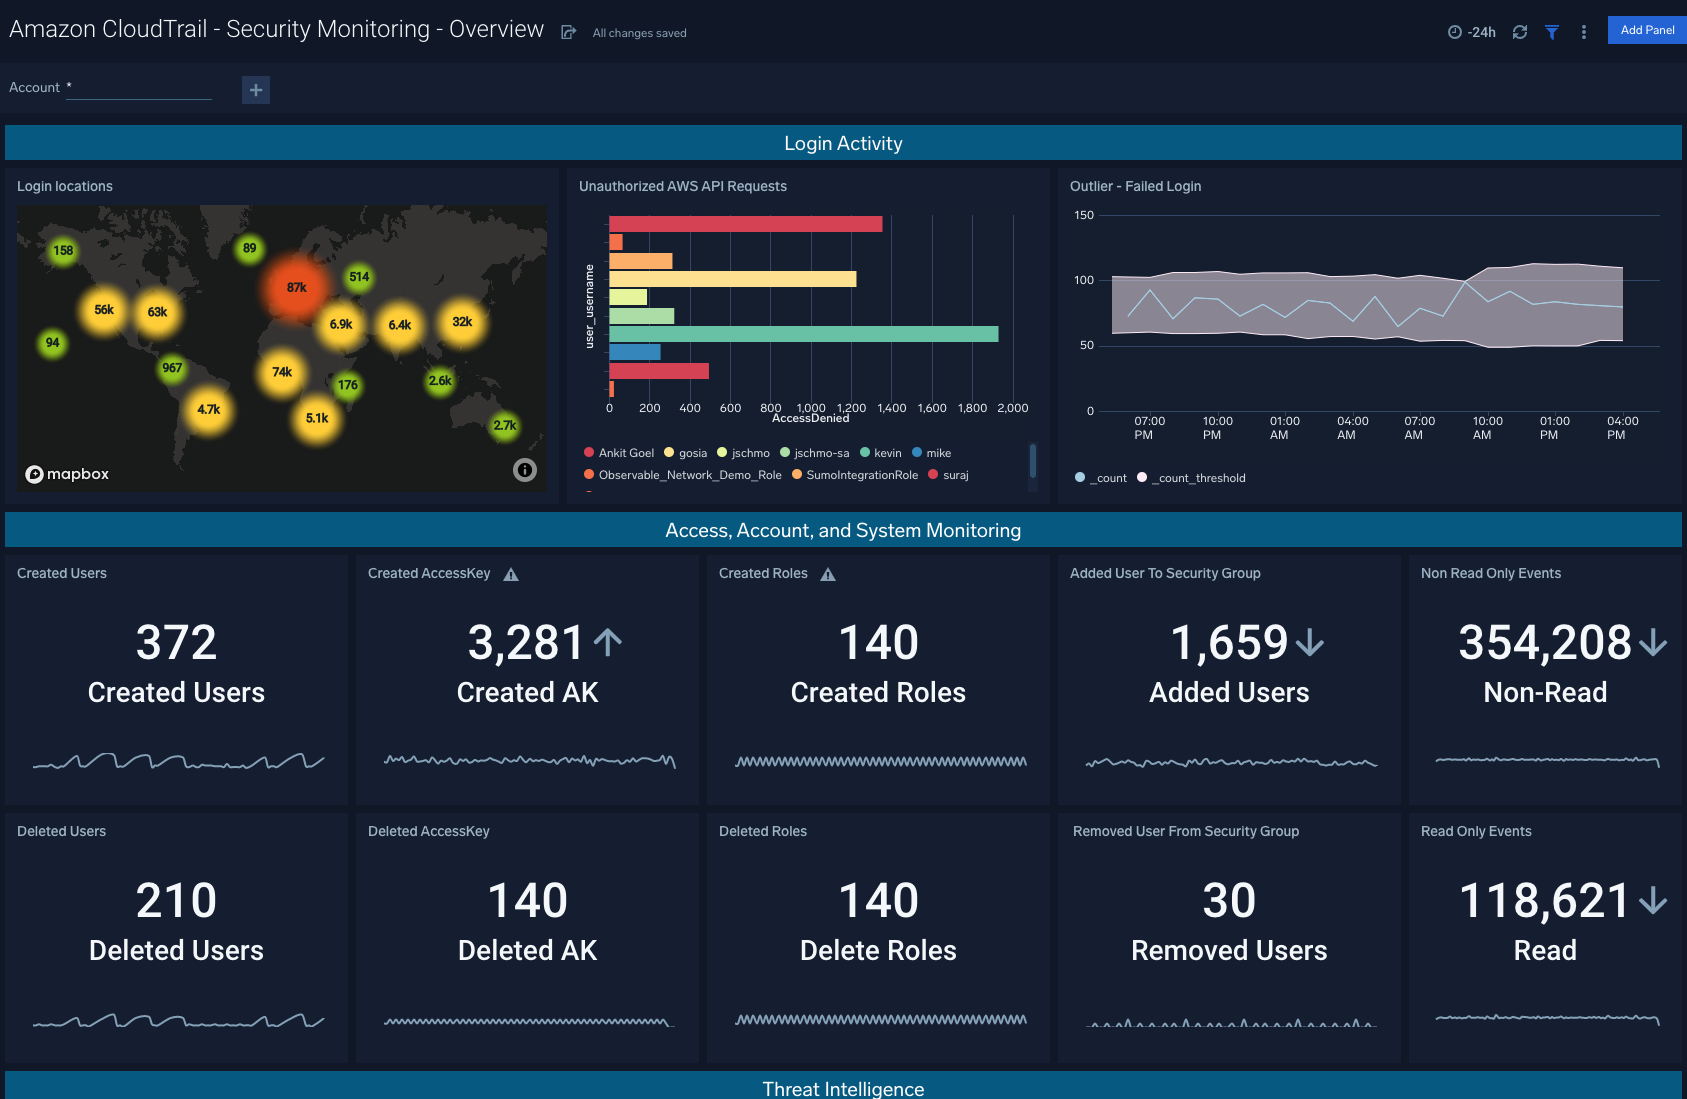 Amazon CloudTrail - Security Analytics dashboards